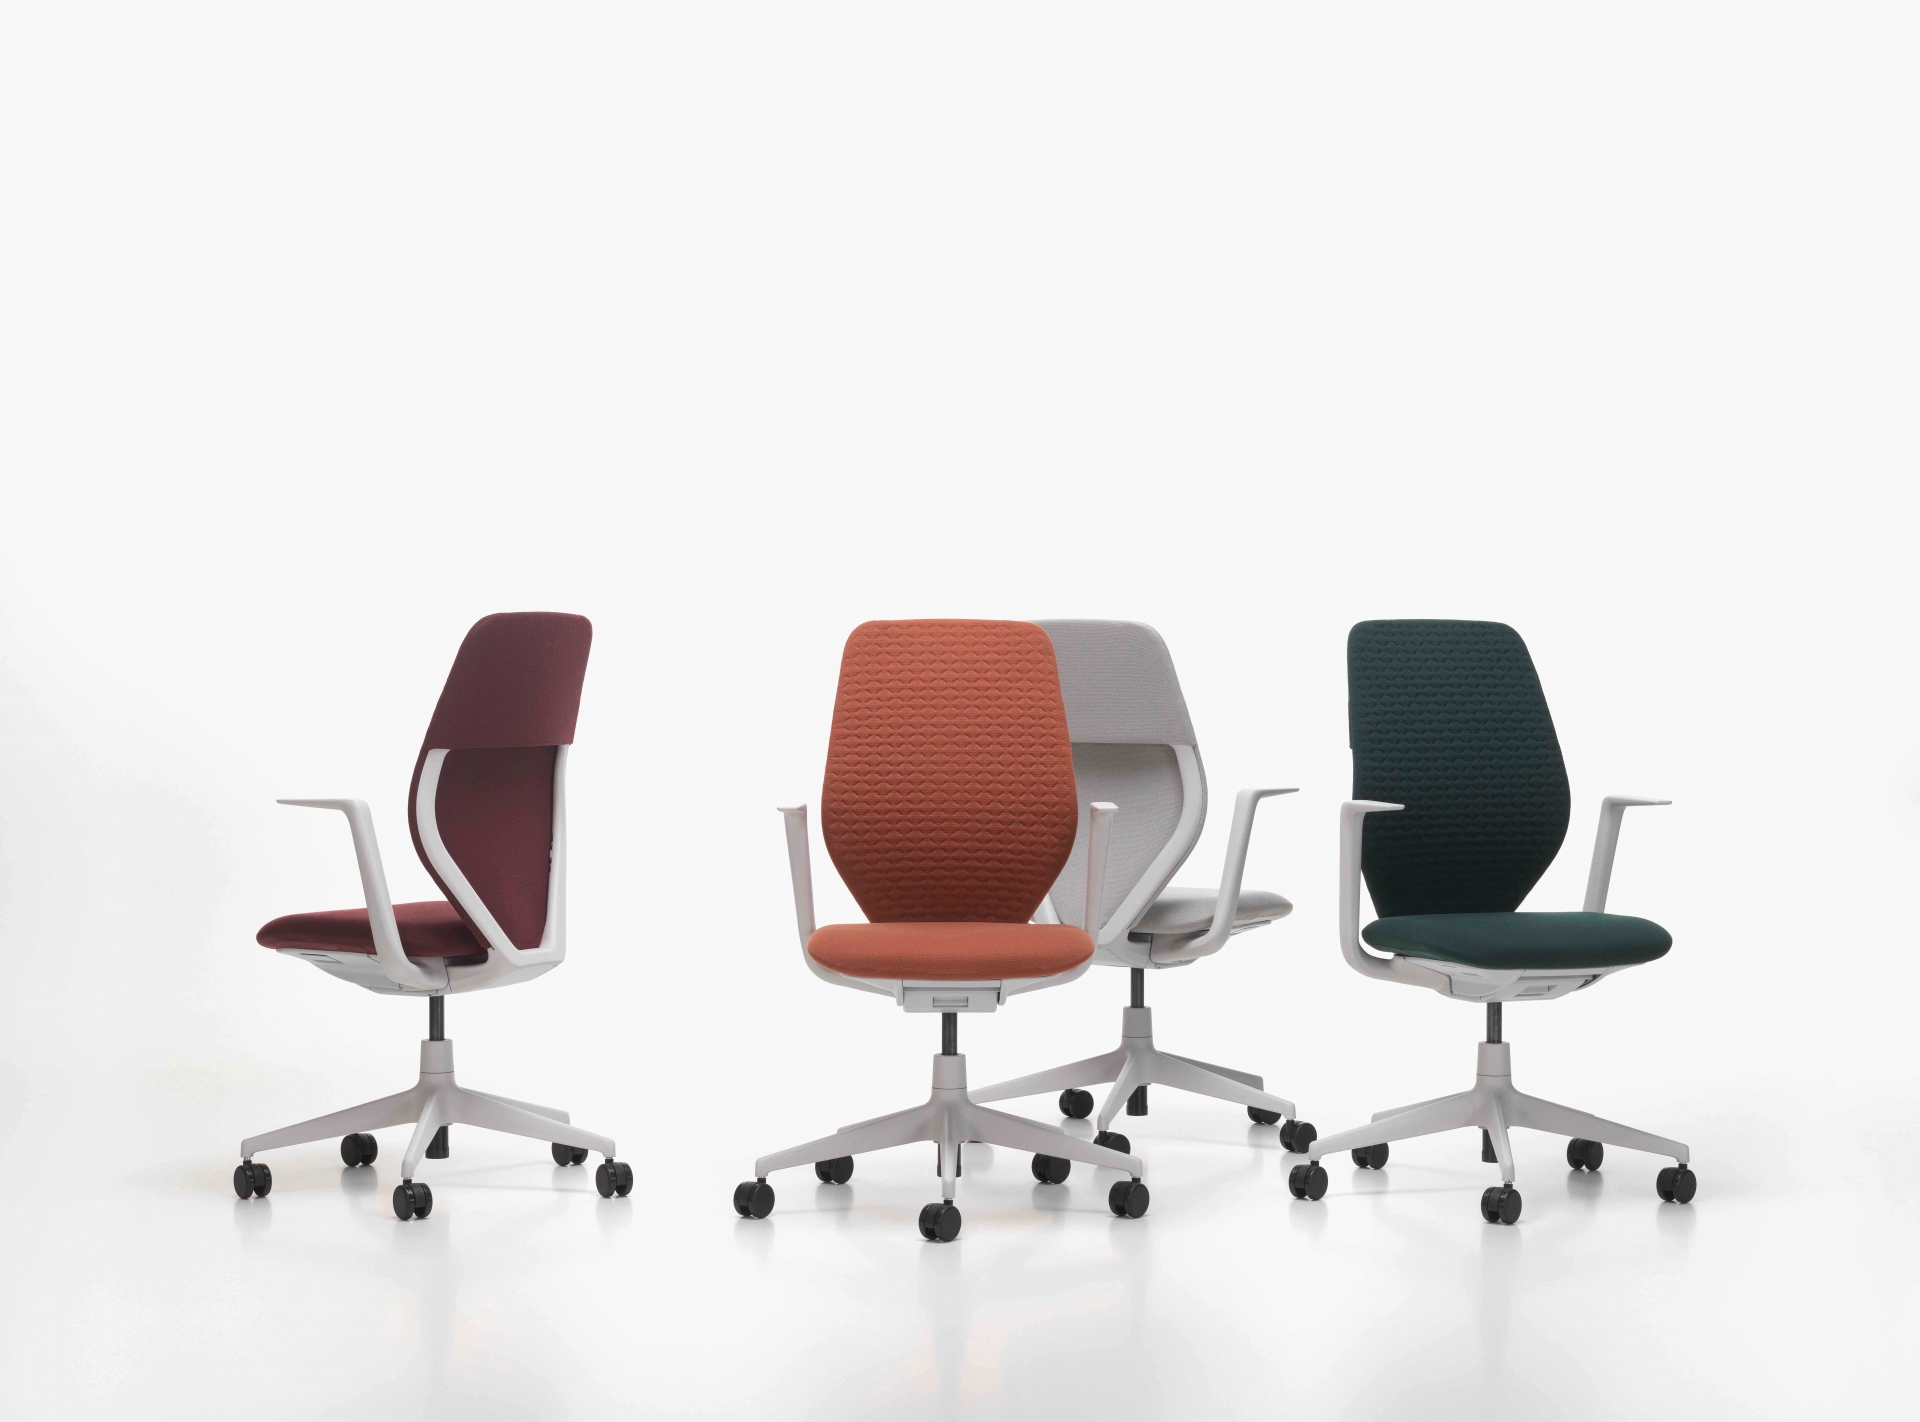 Vitra presents the ACX – the first 100% recyclable office chair designed by Antonio Citterio